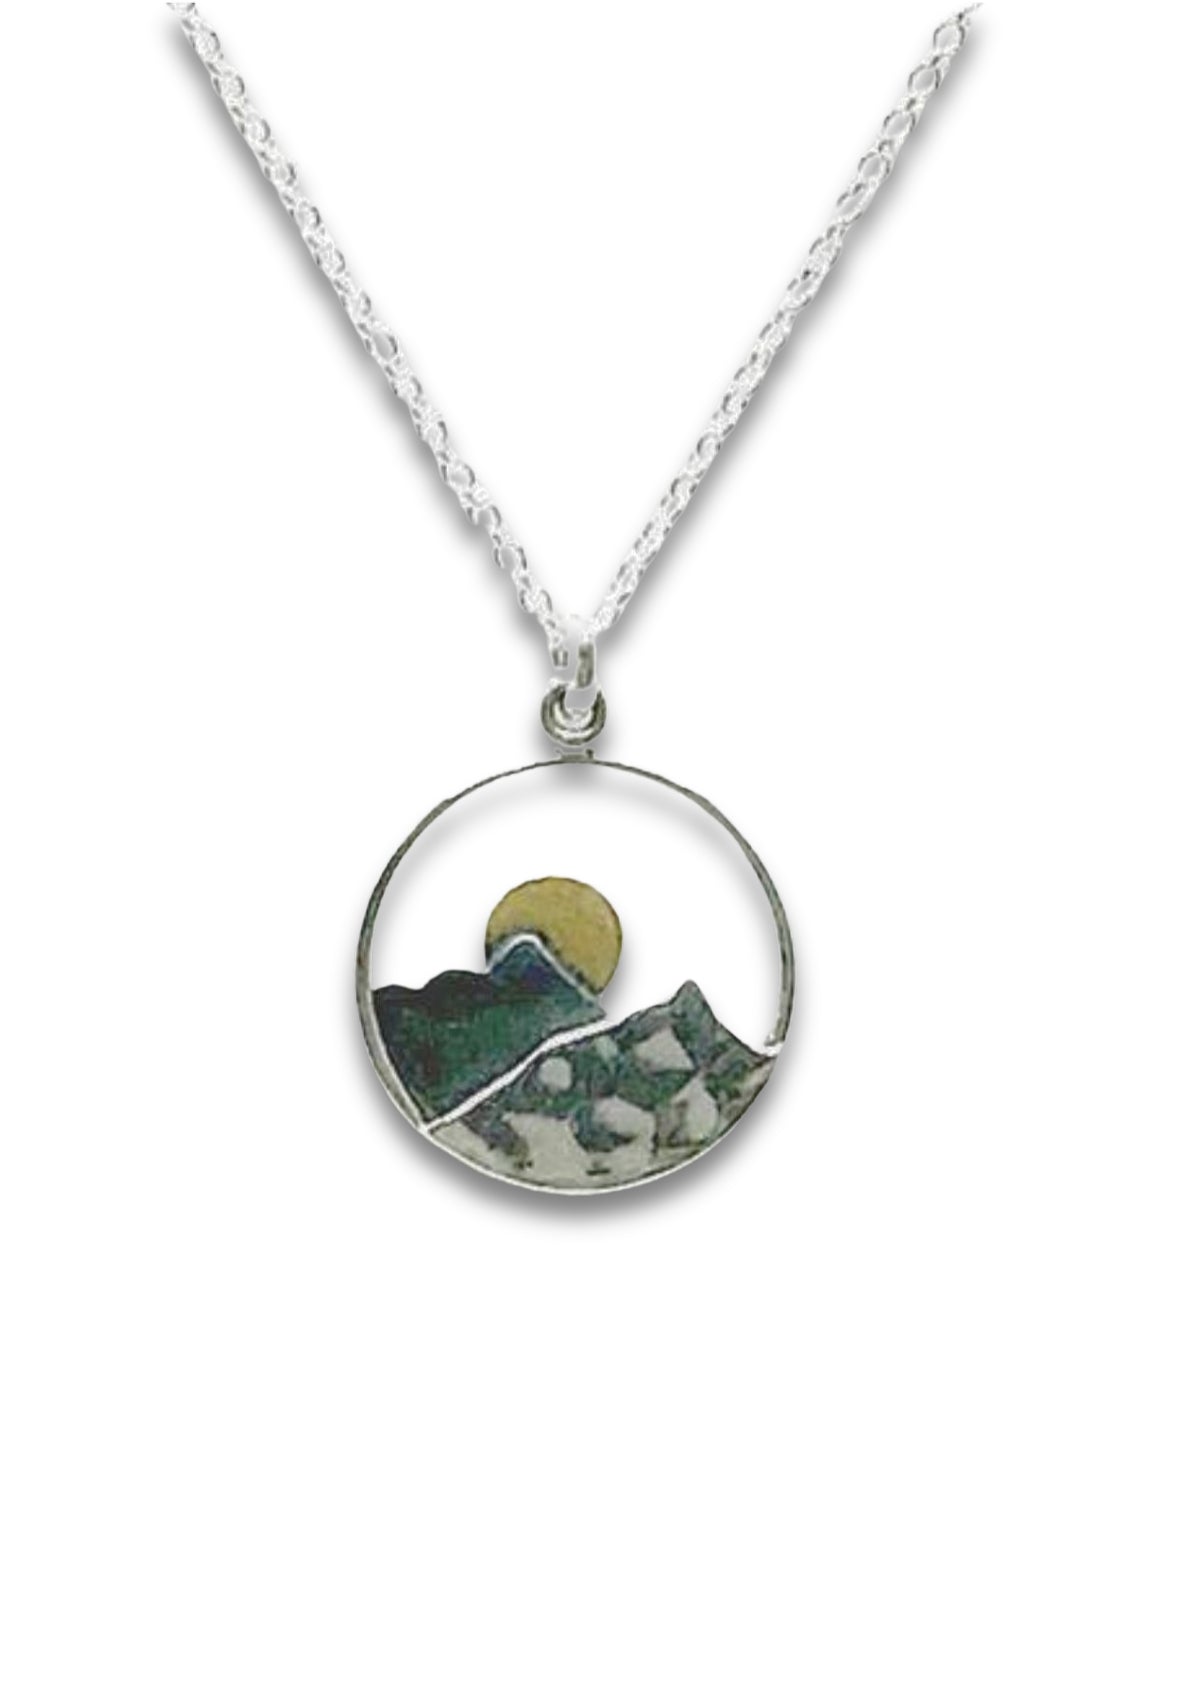 round thin silver with yellow moon layered behind dark mountain with lighter mountain in front. Silver chain.